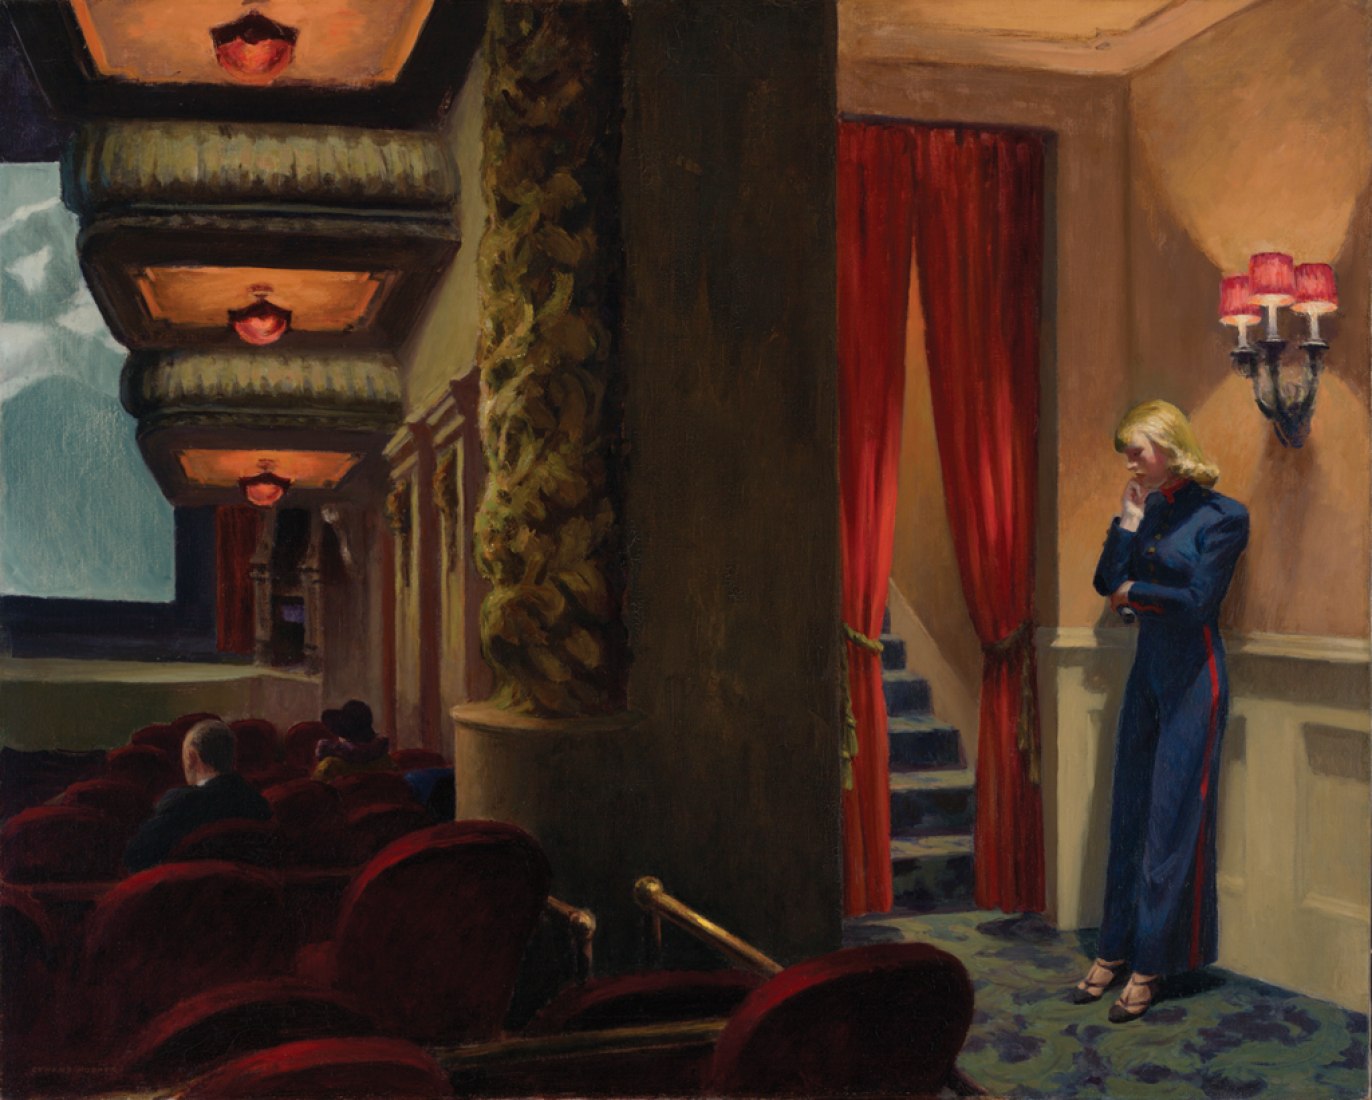 Edward Hopper (1882–1967). New York Movie, 1939. Oil on canvas, 32 1/4 x 40 1/8 in. (81.9 x 101.9 cm). The Museum of Modern Art, New York; given anonymously  396.1941. © Heirs of Josephine N. Hopper, licensed by the Whitney Museum of American Art. Digital Image © The Museum of Modern Art/Licensed by SCALA / Art Resource, NY. 